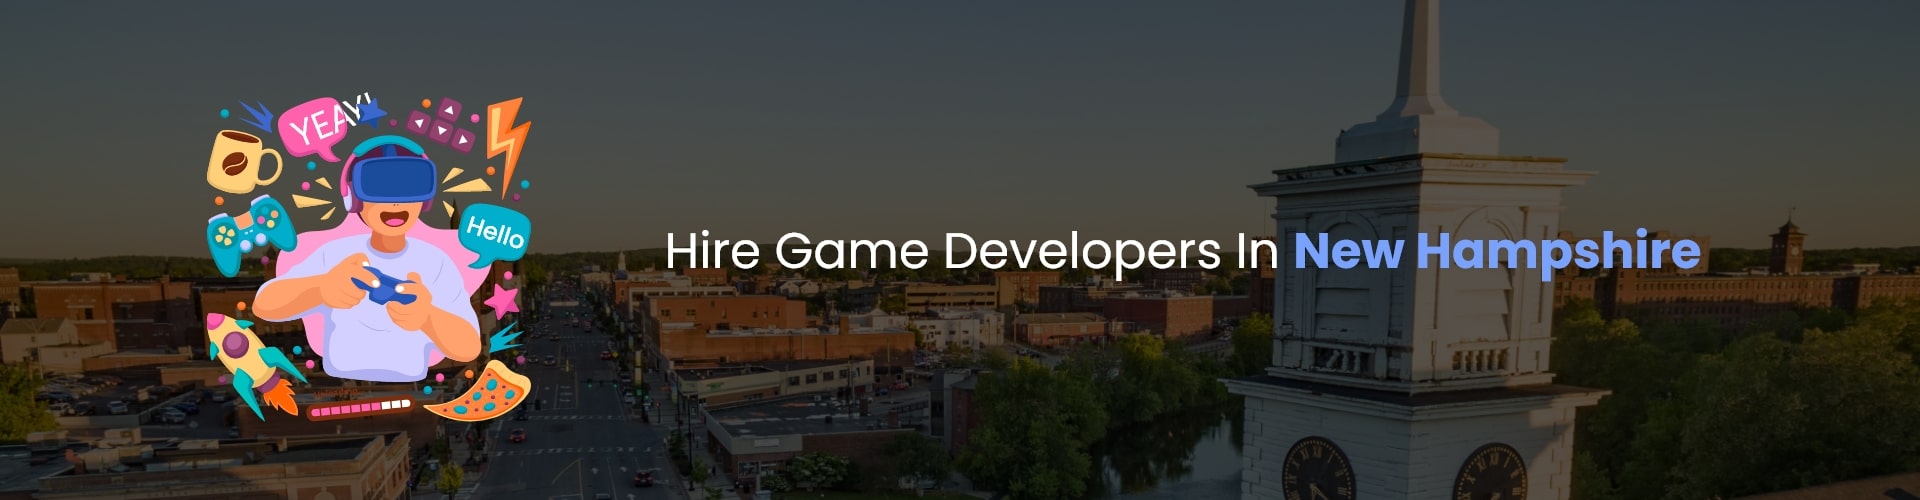 hire game developers in new hampshire